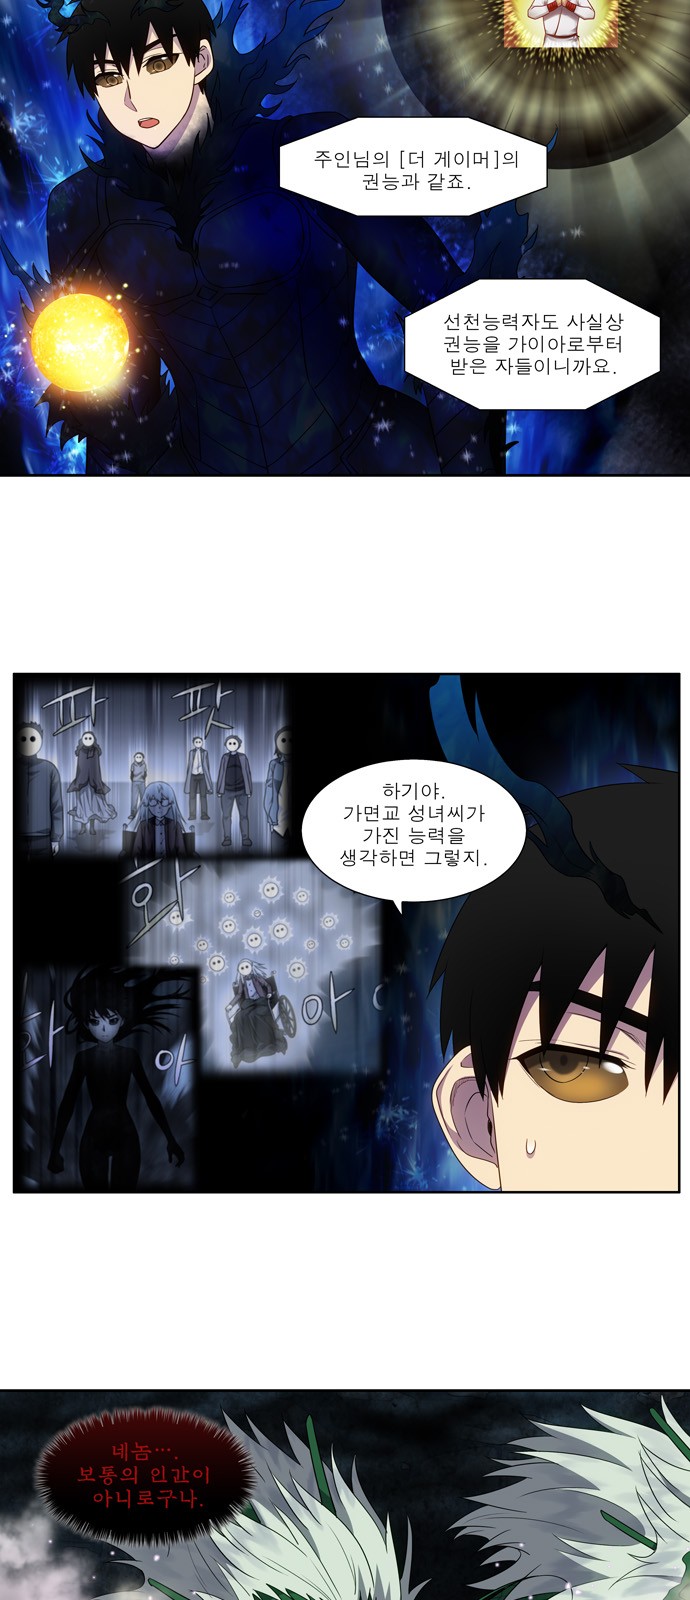 The Gamer - Chapter 429 - Page 3